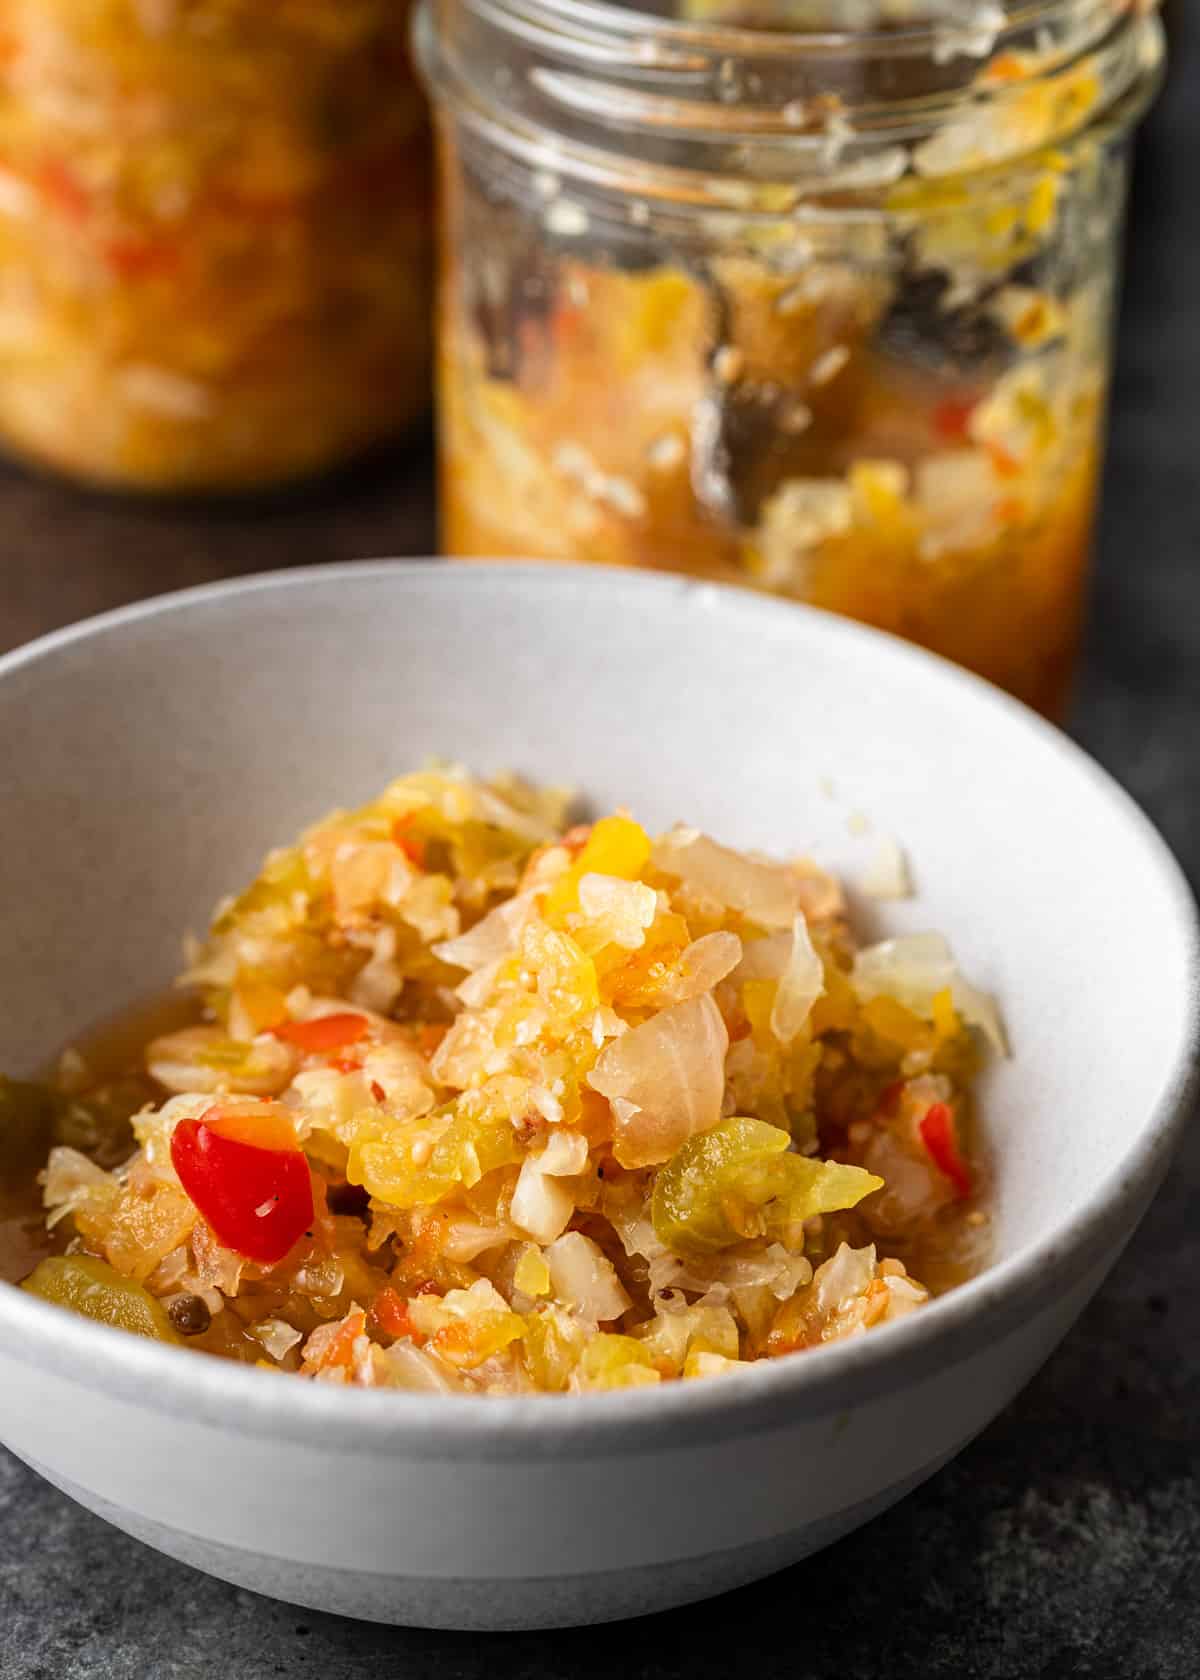 side view closeup: a bowl with Chow Chow relish and a jar with more showing